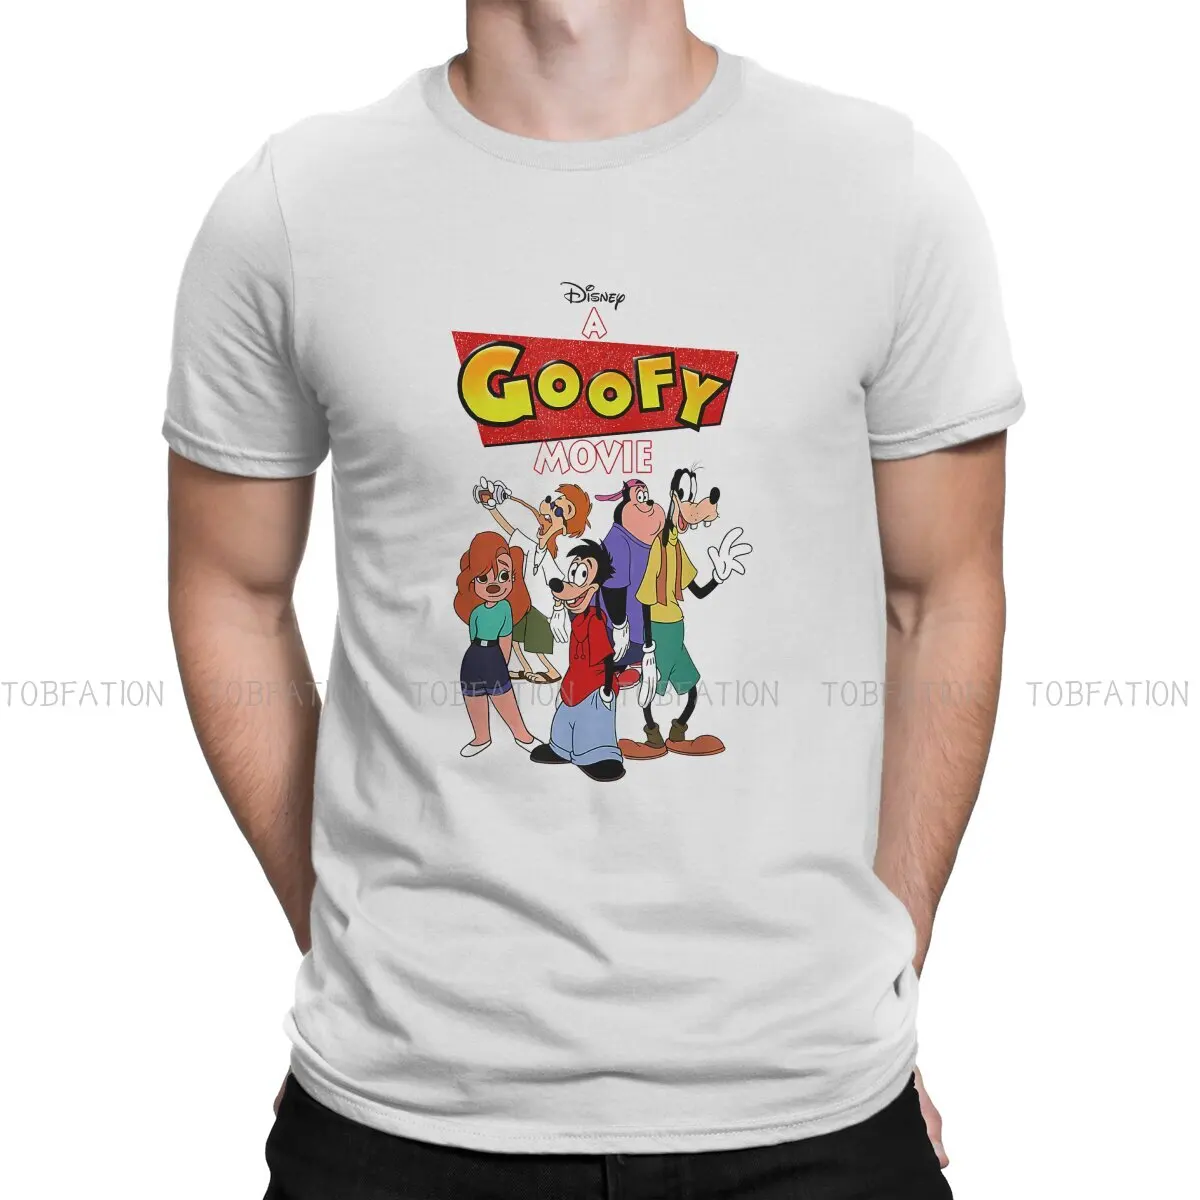 

Disney Goofy Newest TShirt for Men A Movie Group Shot Essential Round Collar Basic T Shirt Personalize Gift Clothes Tops 6XL